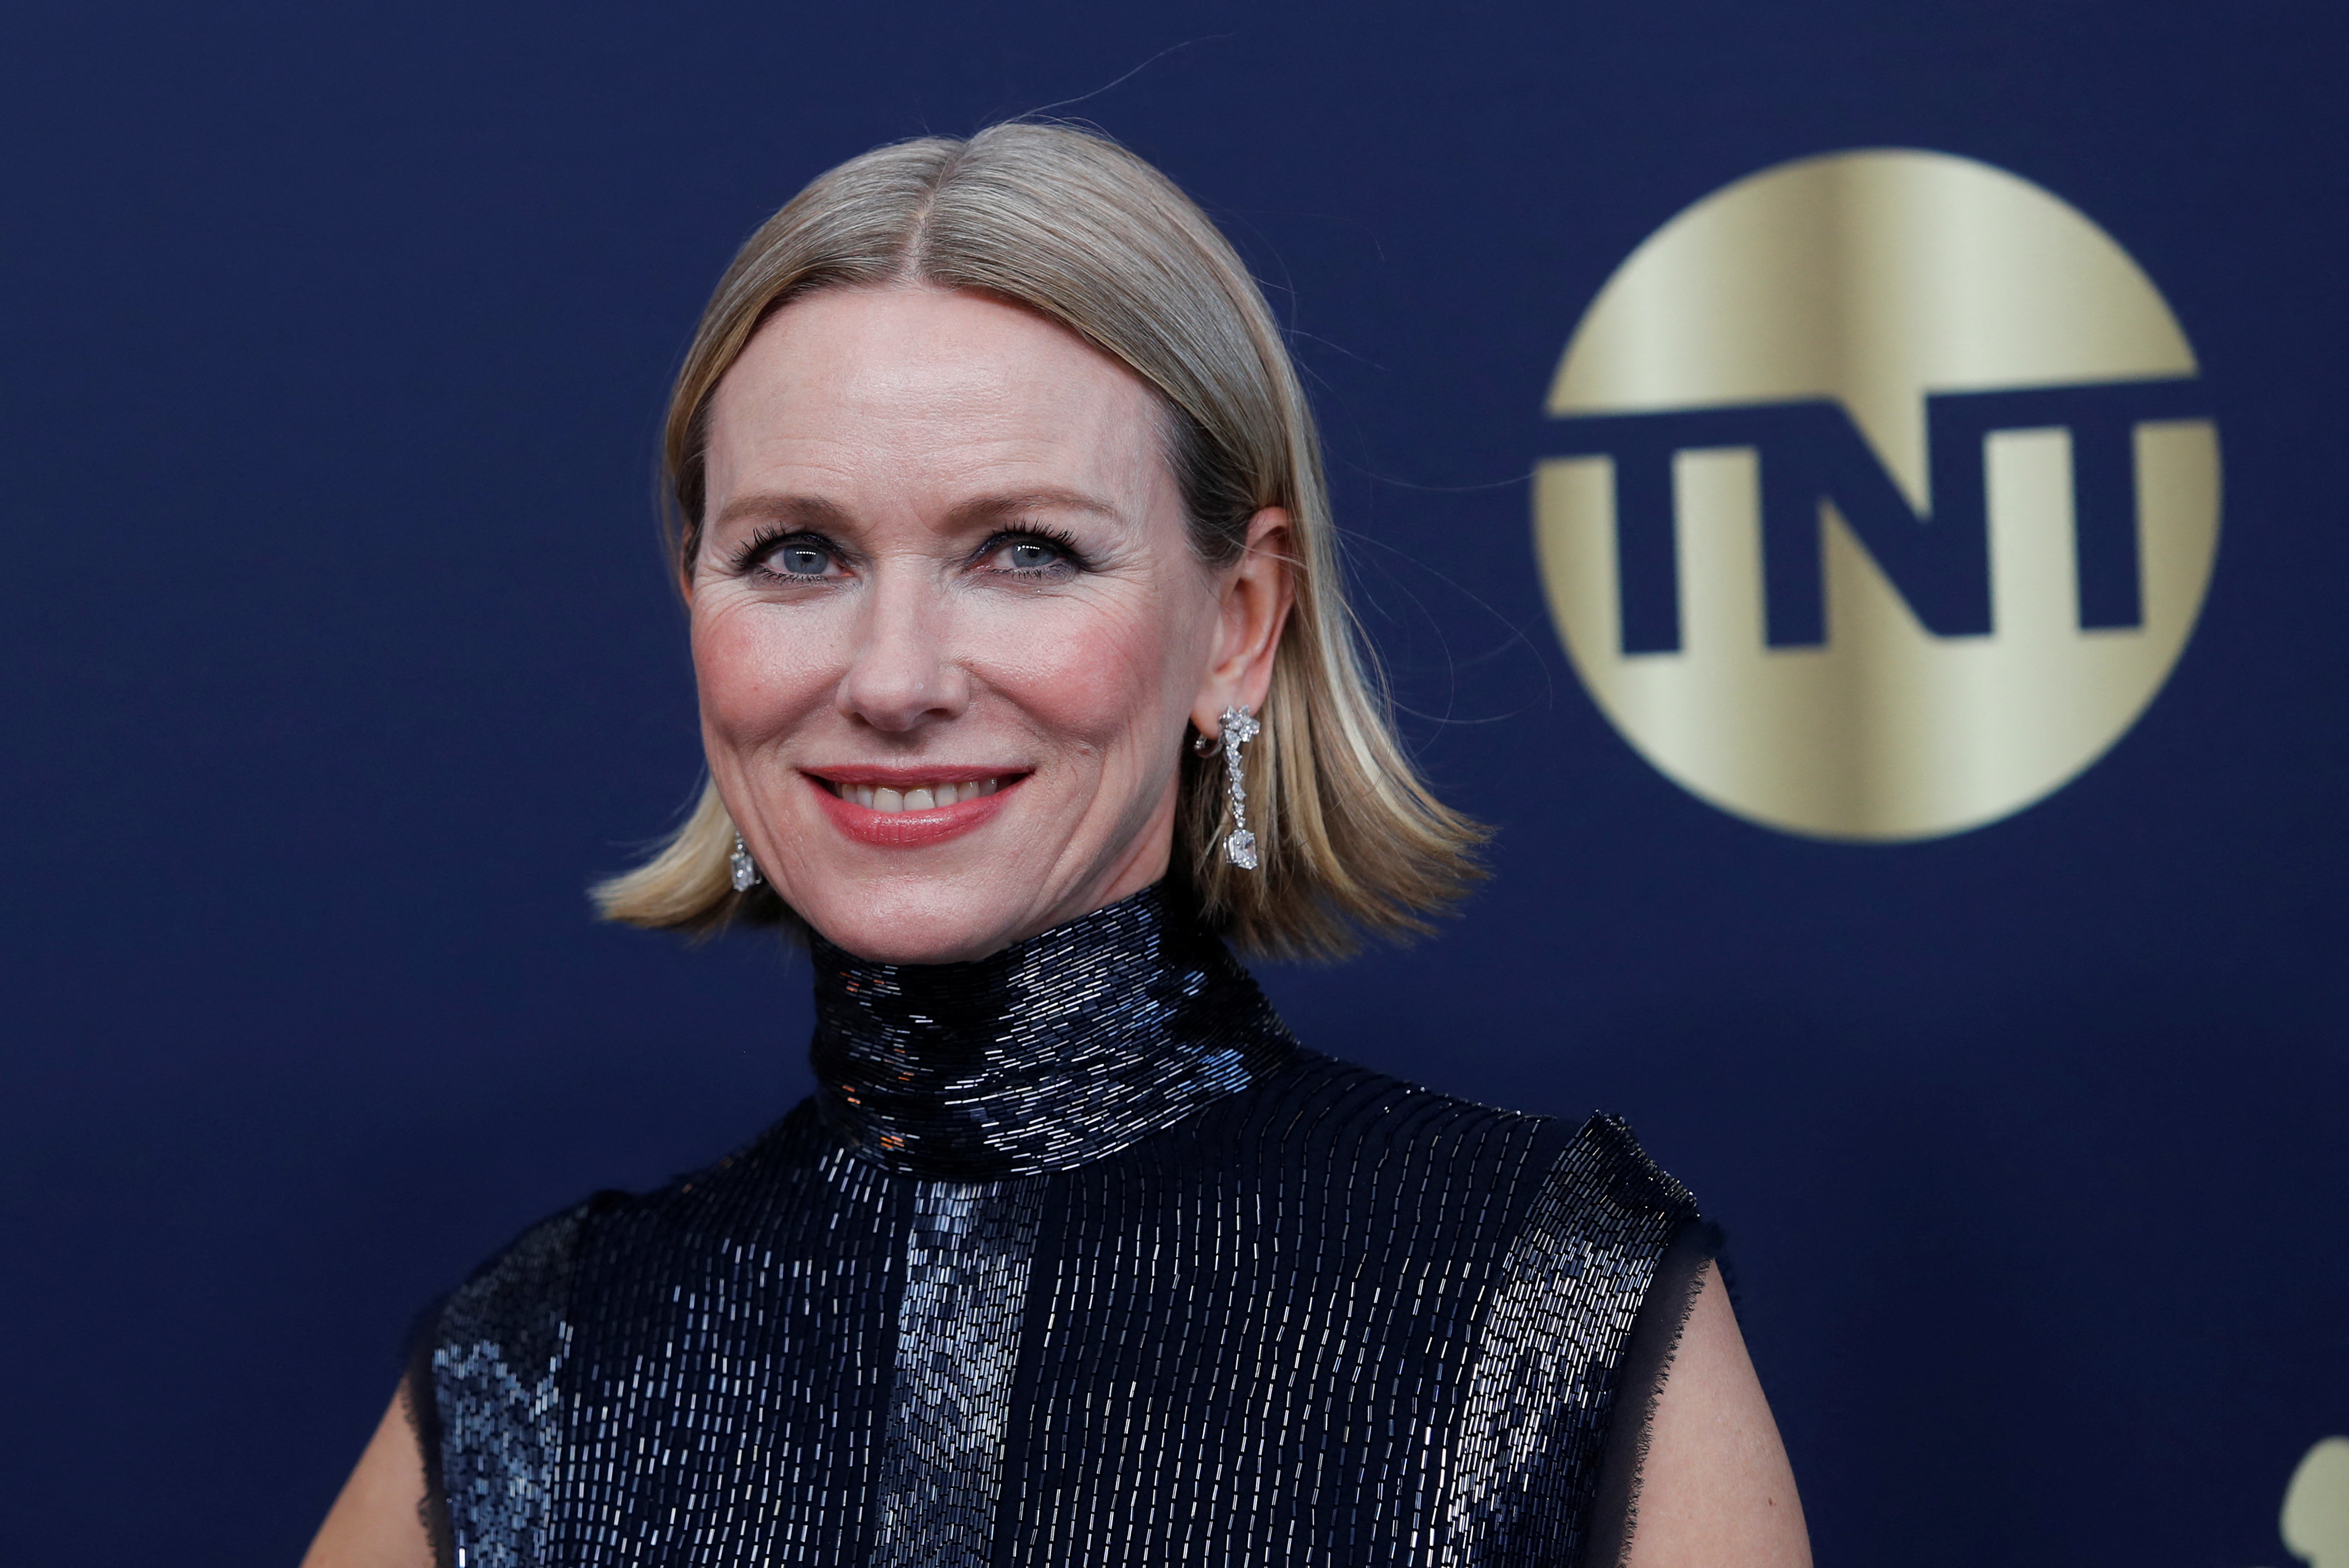 Naomi Watts shines in the series "The Watcher" on Netflix REUTERS/Aude Guerrucci